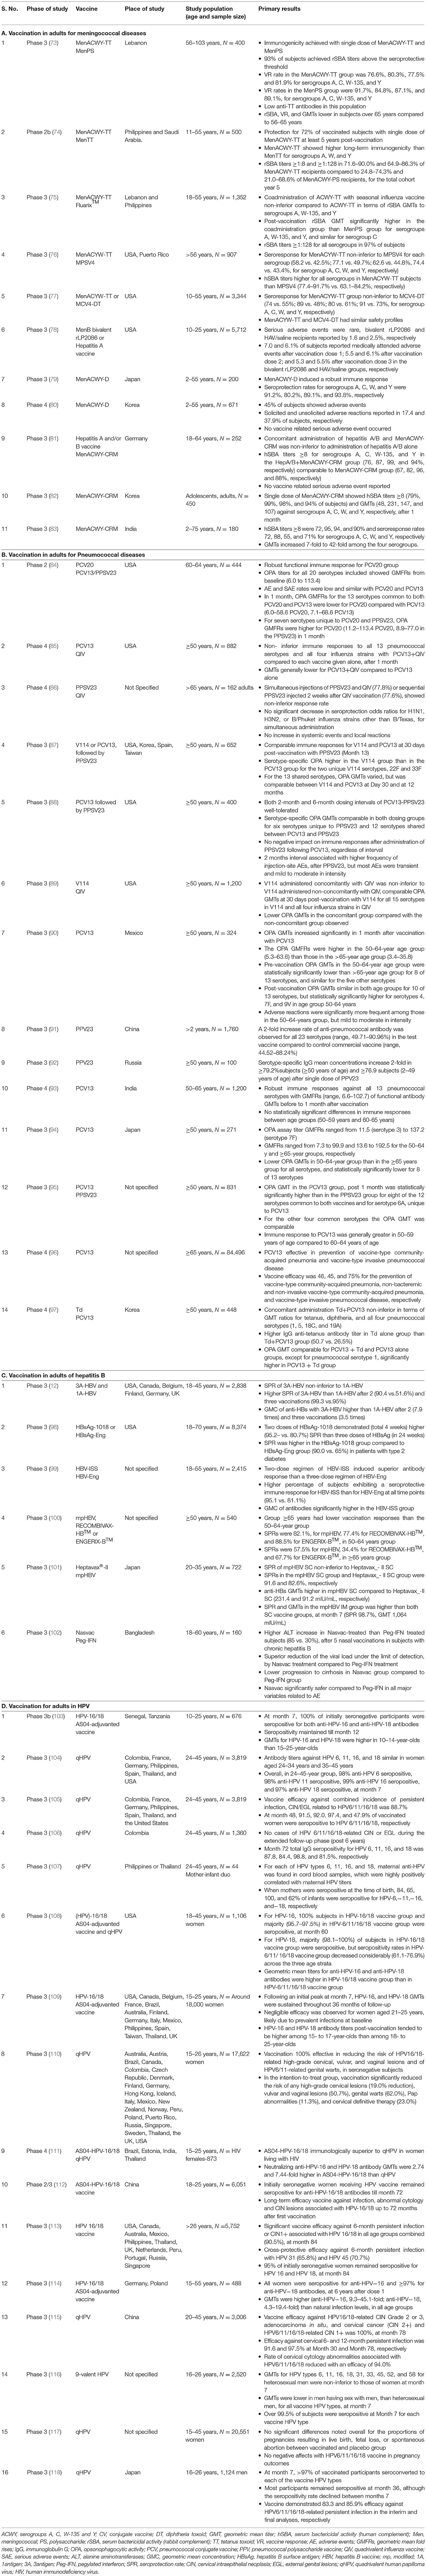 Structured Benefit-Risk Assessment of a New Quadrivalent Meningococcal  Conjugate Vaccine (MenACYW-TT) in Individuals Ages 12 Months and Older